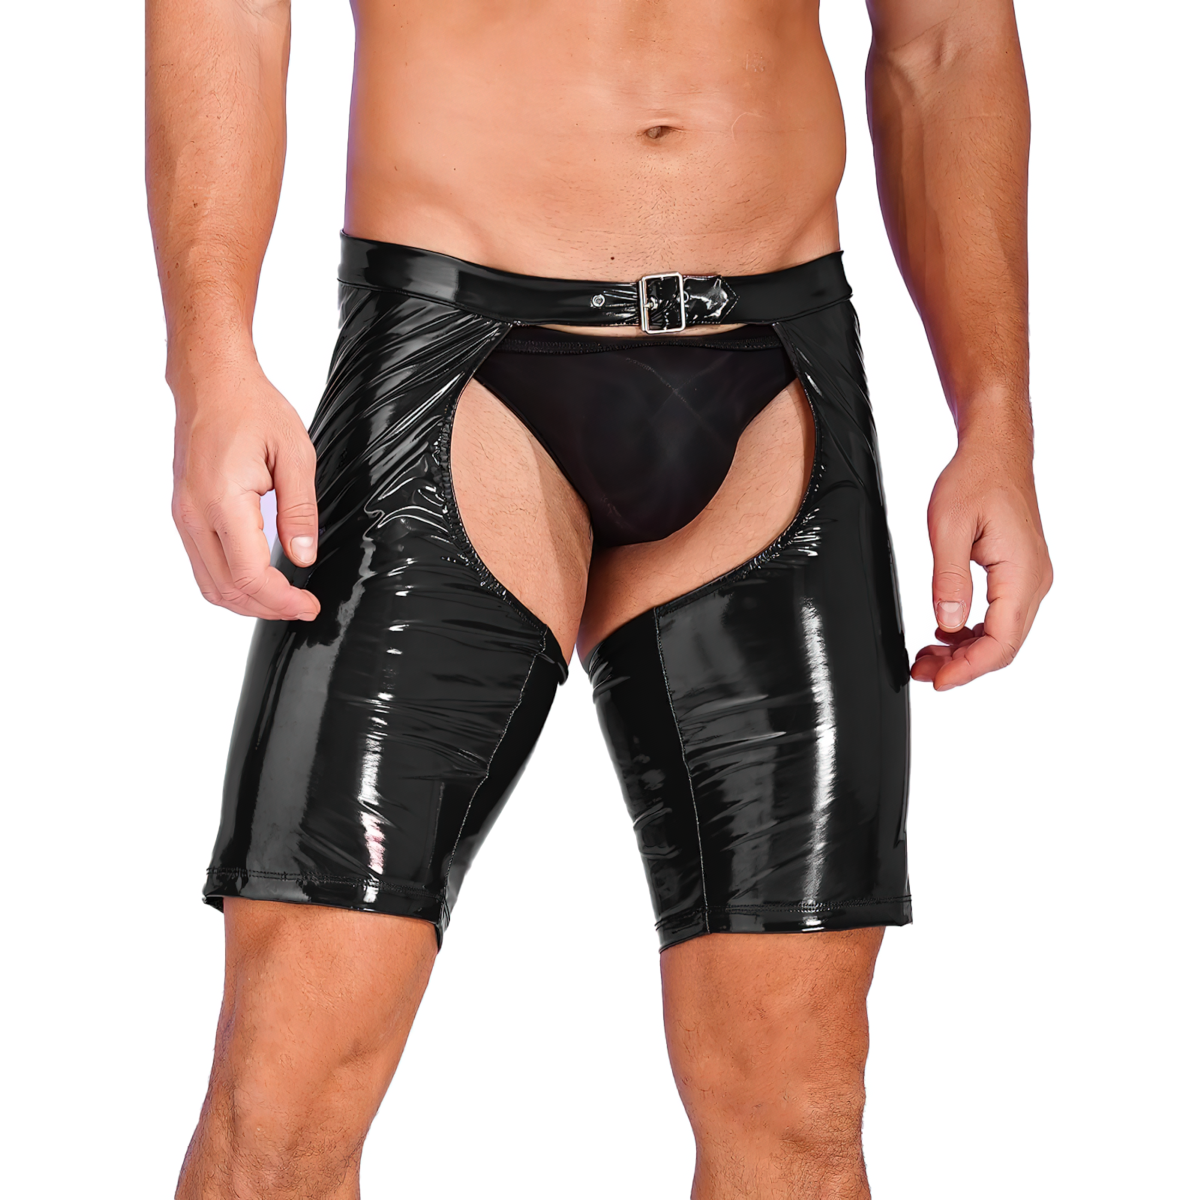 Sexy Men's PU Leather Shorts with Access / Erotic Male Wet Look Effect Clothing - EVE's SECRETS